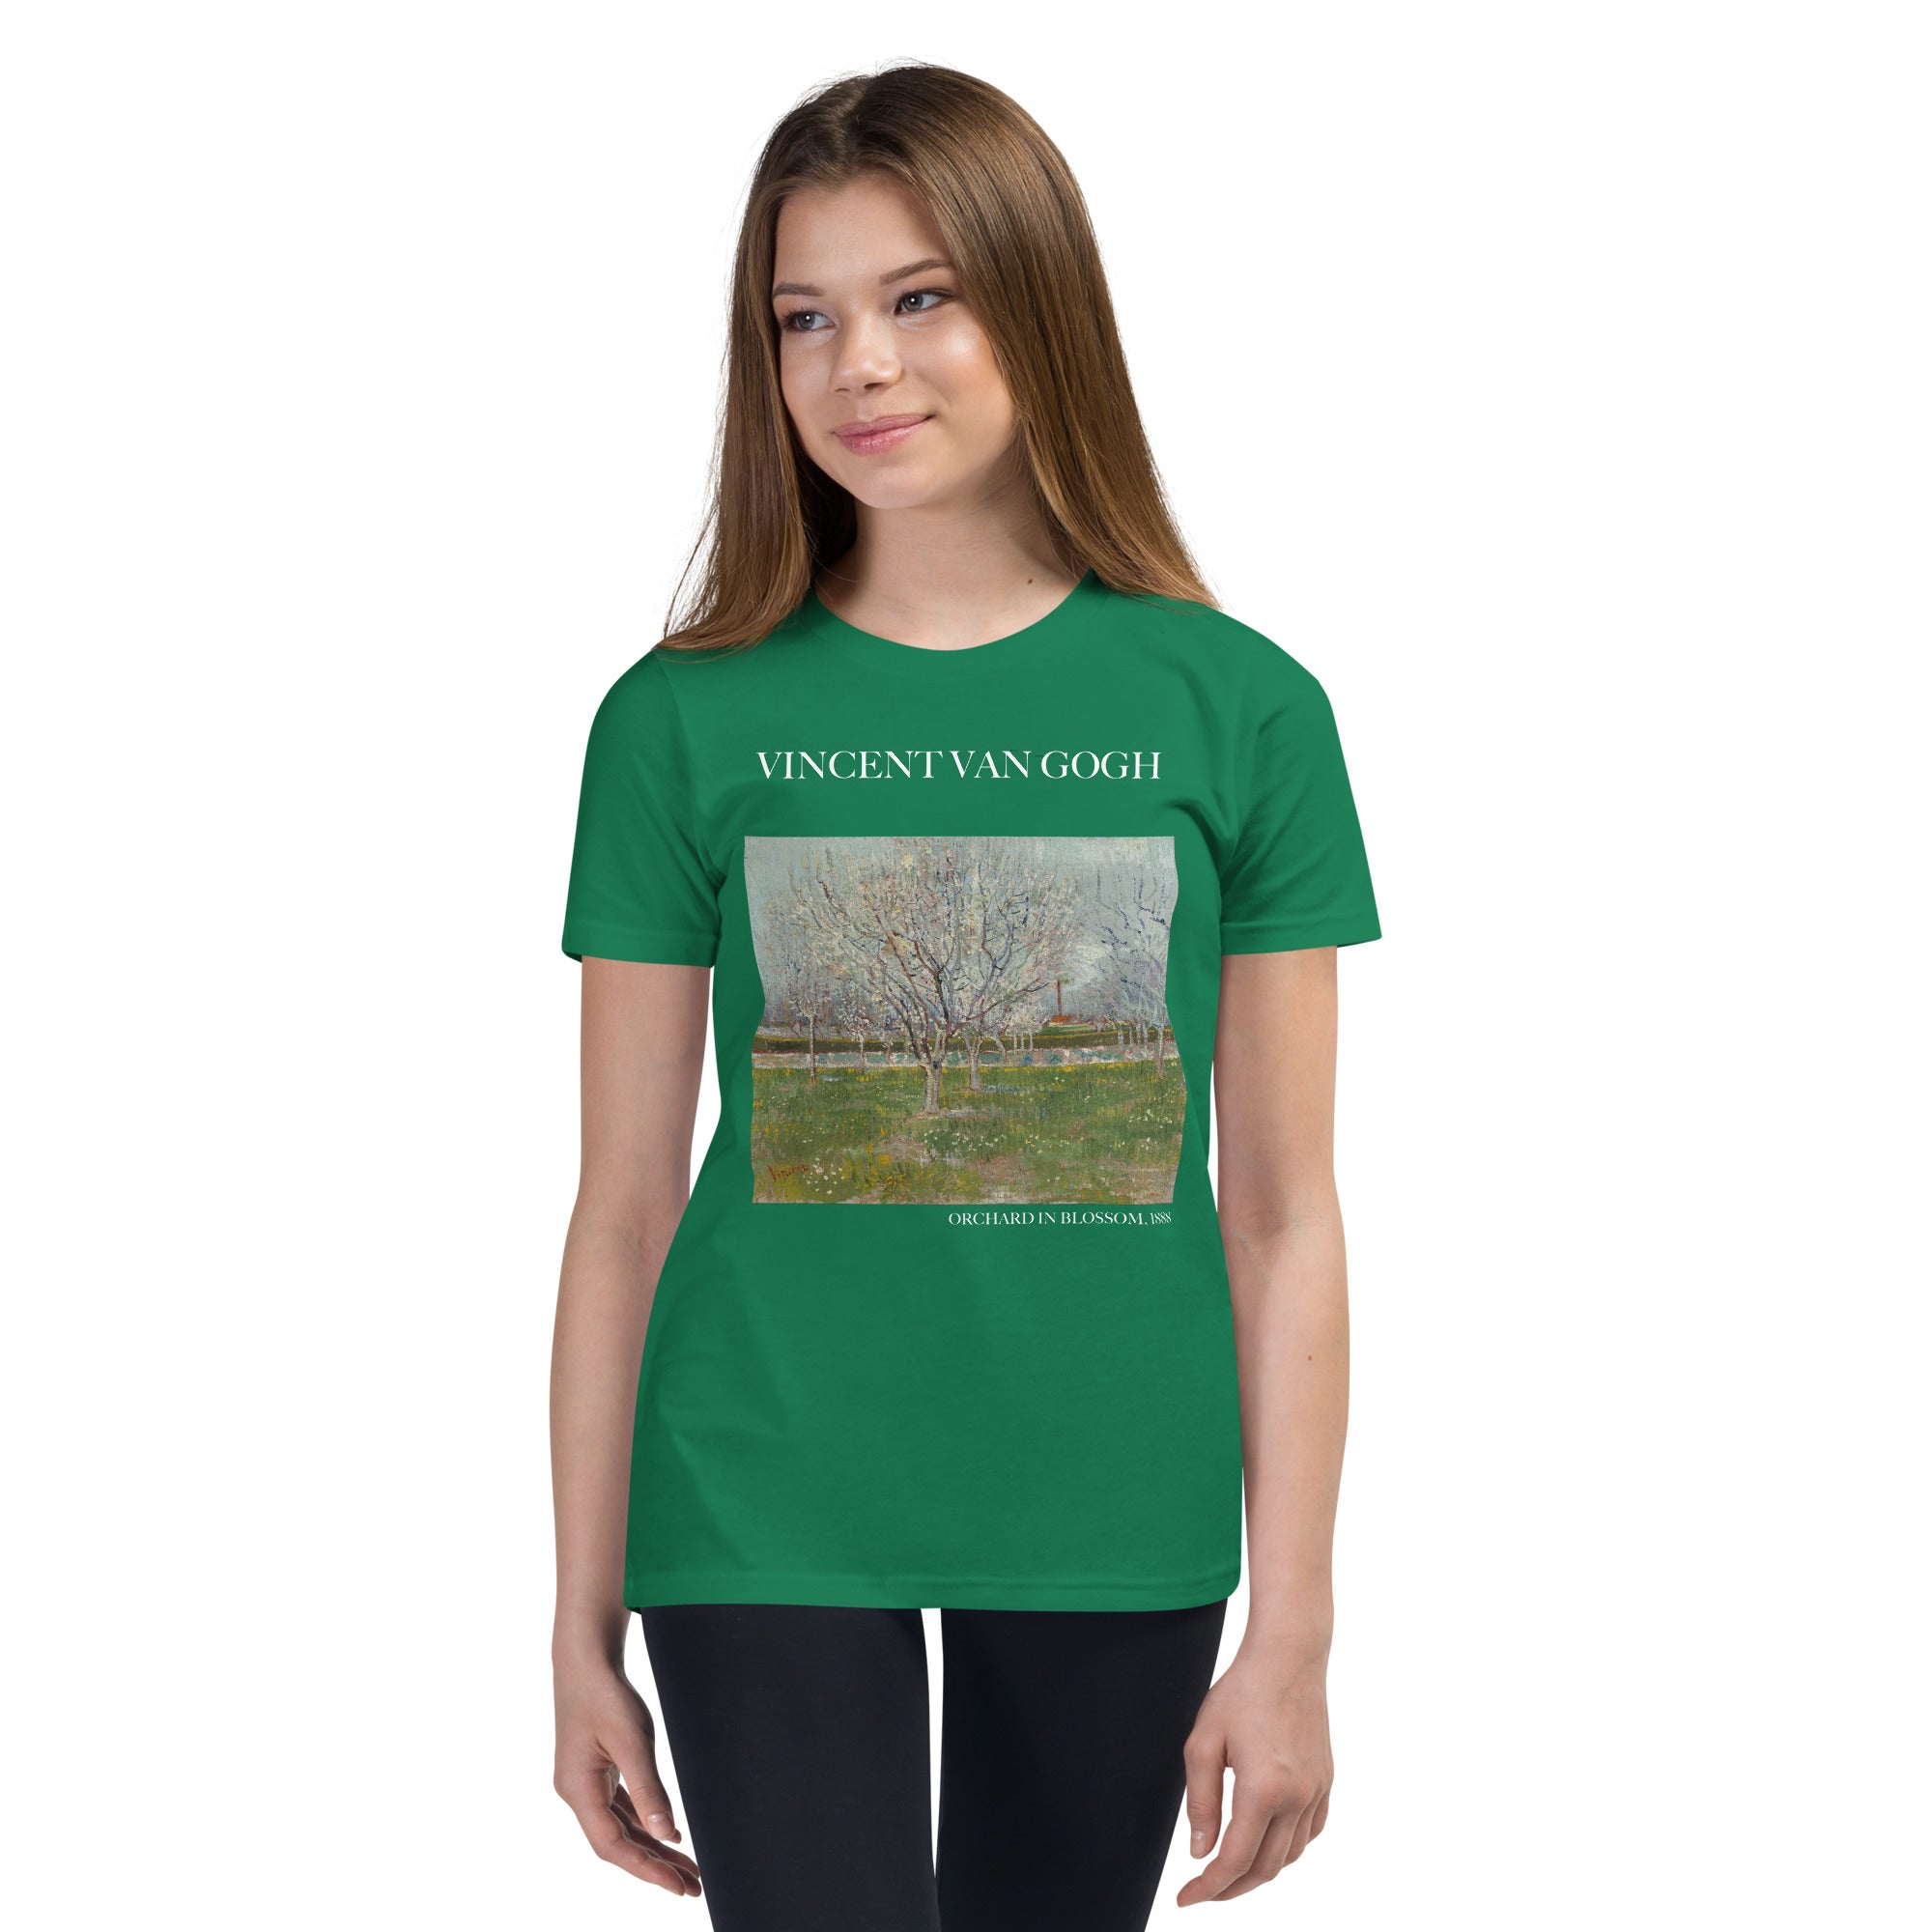 Vincent van Gogh 'Orchard in Blossom' Famous Painting Short Sleeve T-Shirt | Premium Youth Art Tee